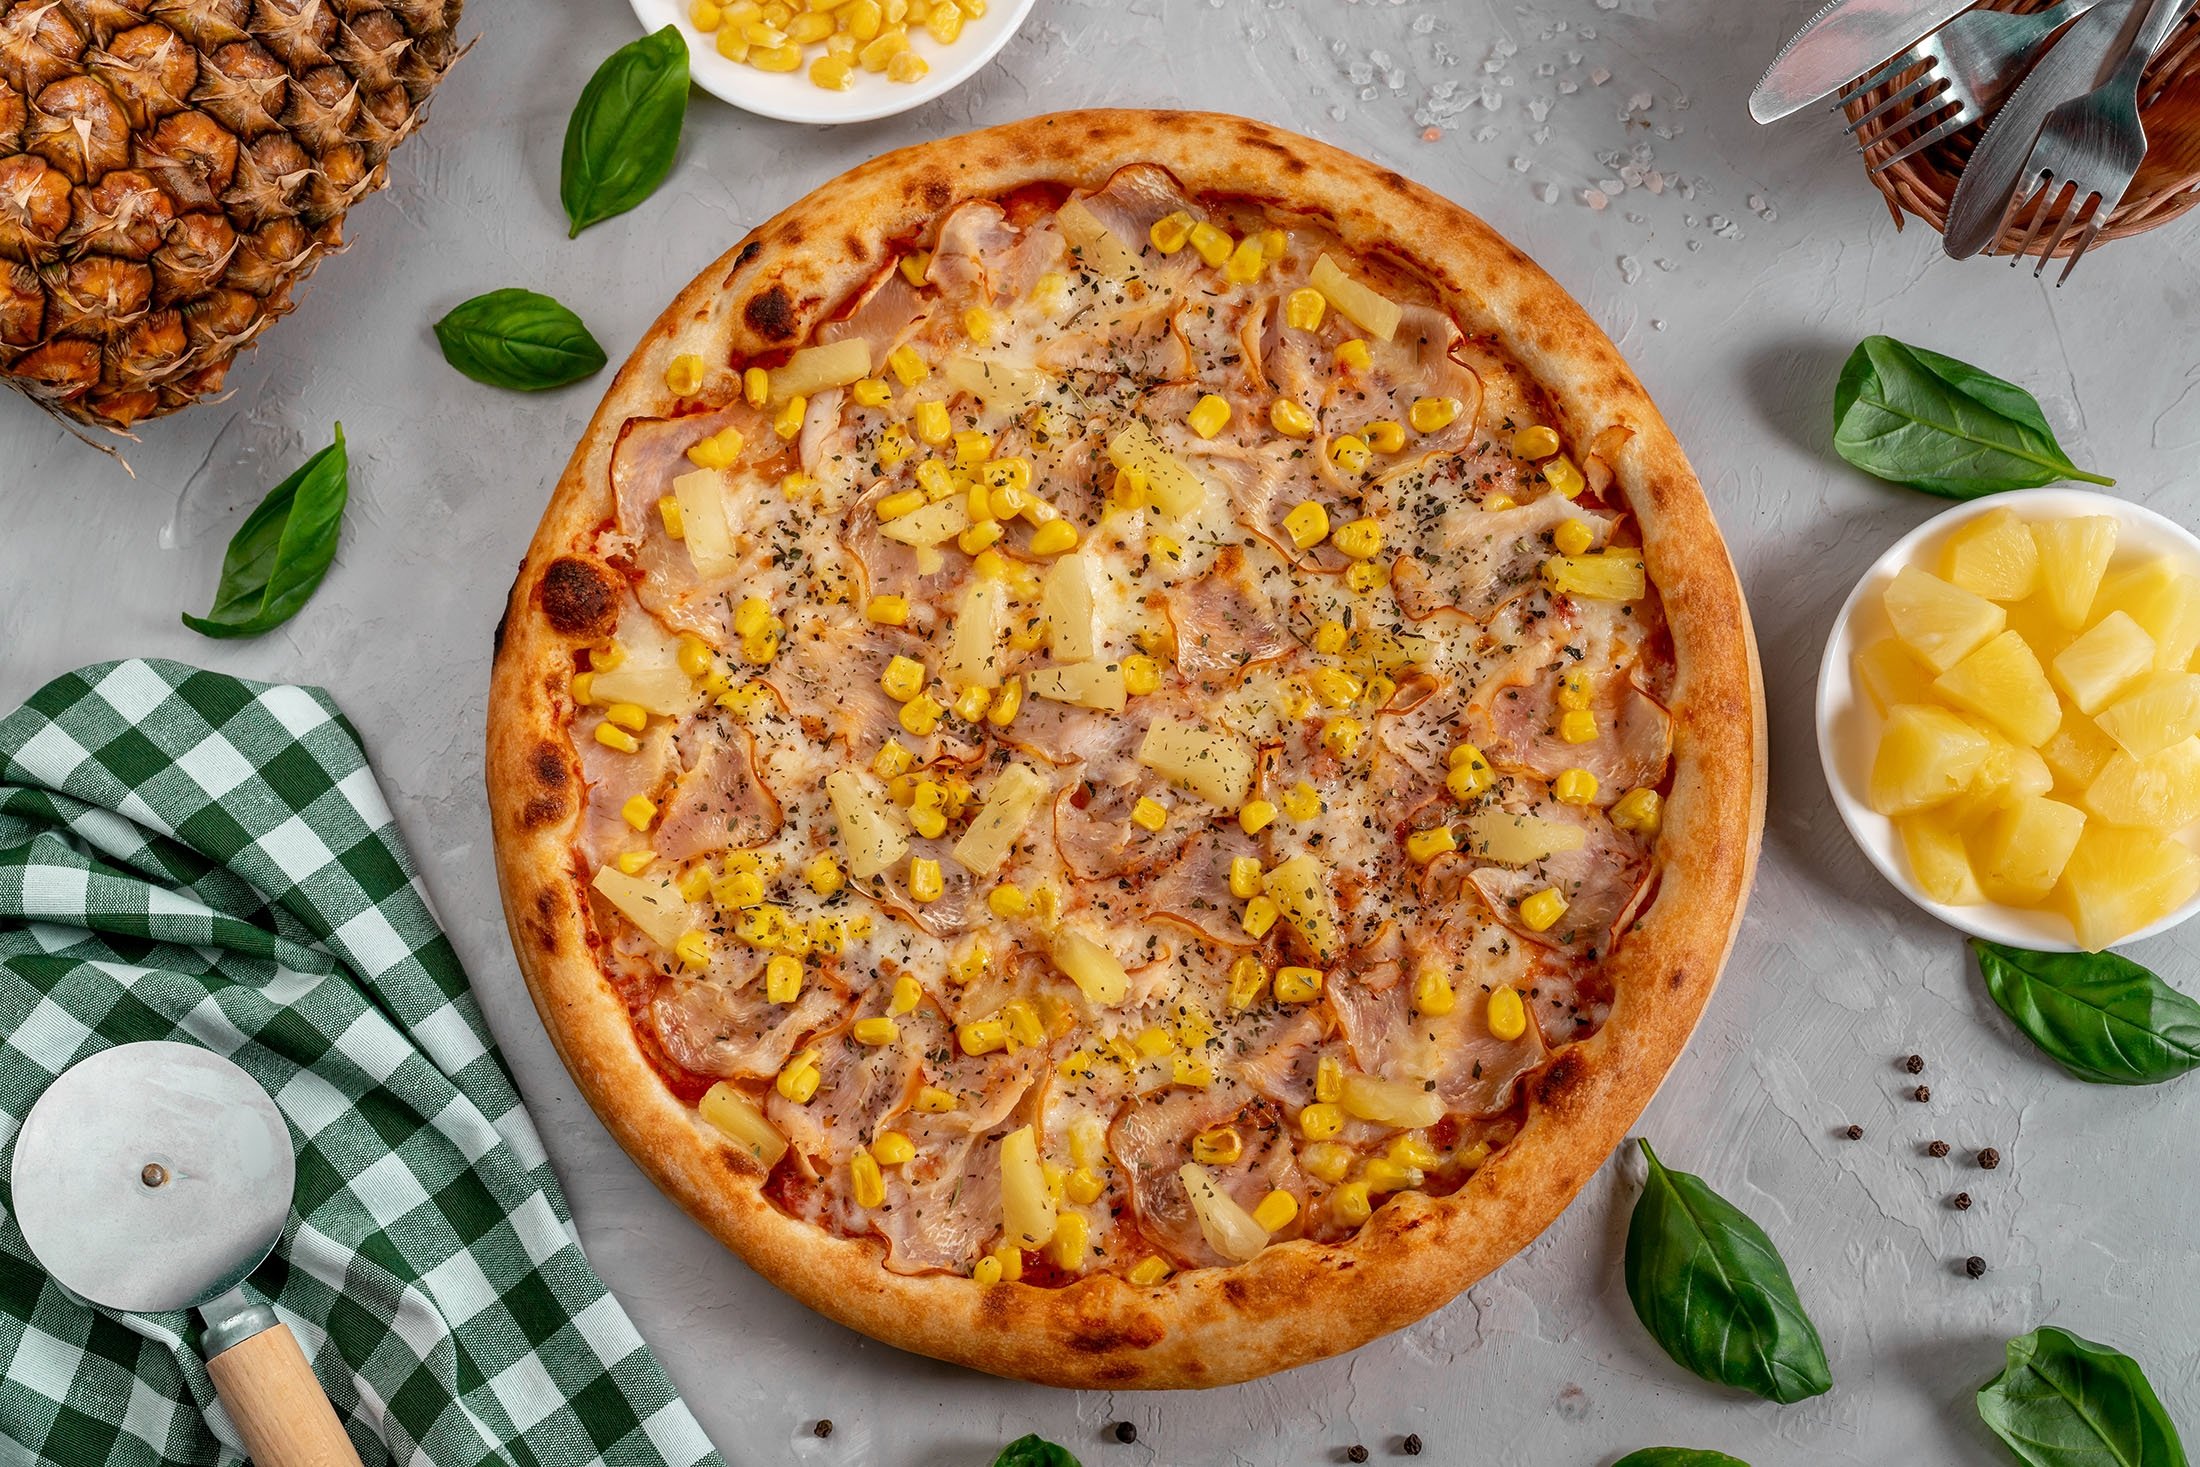 Pineapple is without a doubt the most contested topping for pizza. (Shutterstock Photo)